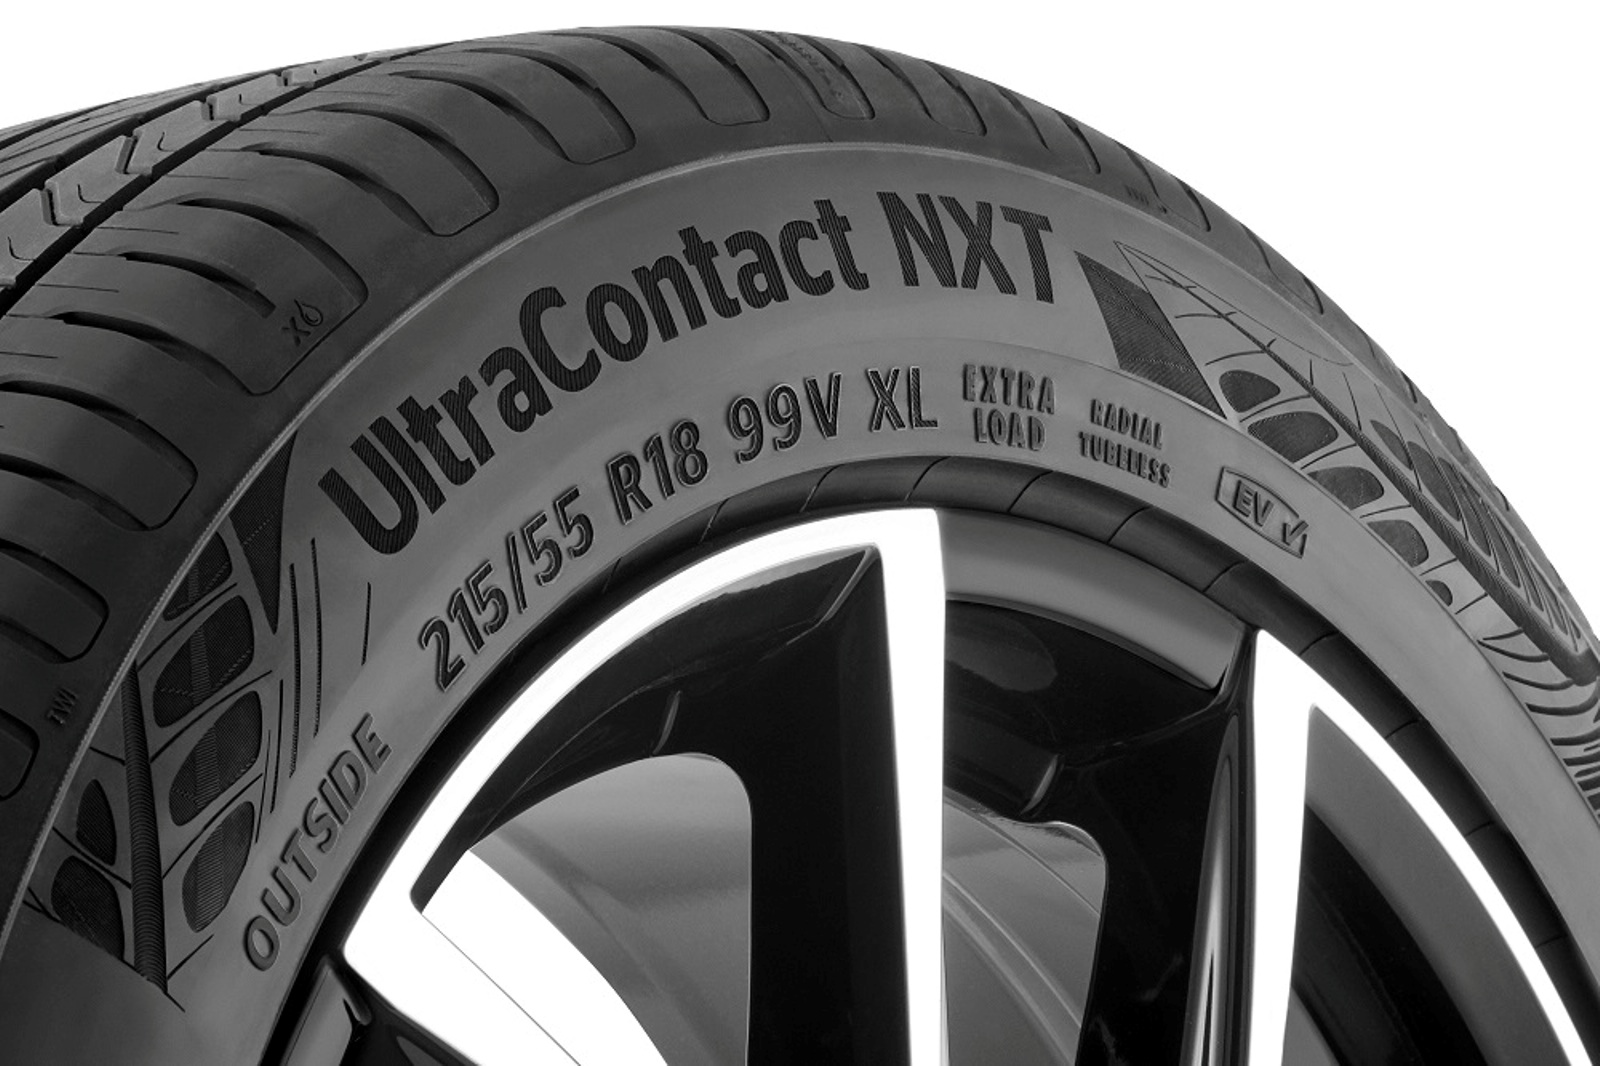 Continental Ultracontact Nxt (2)